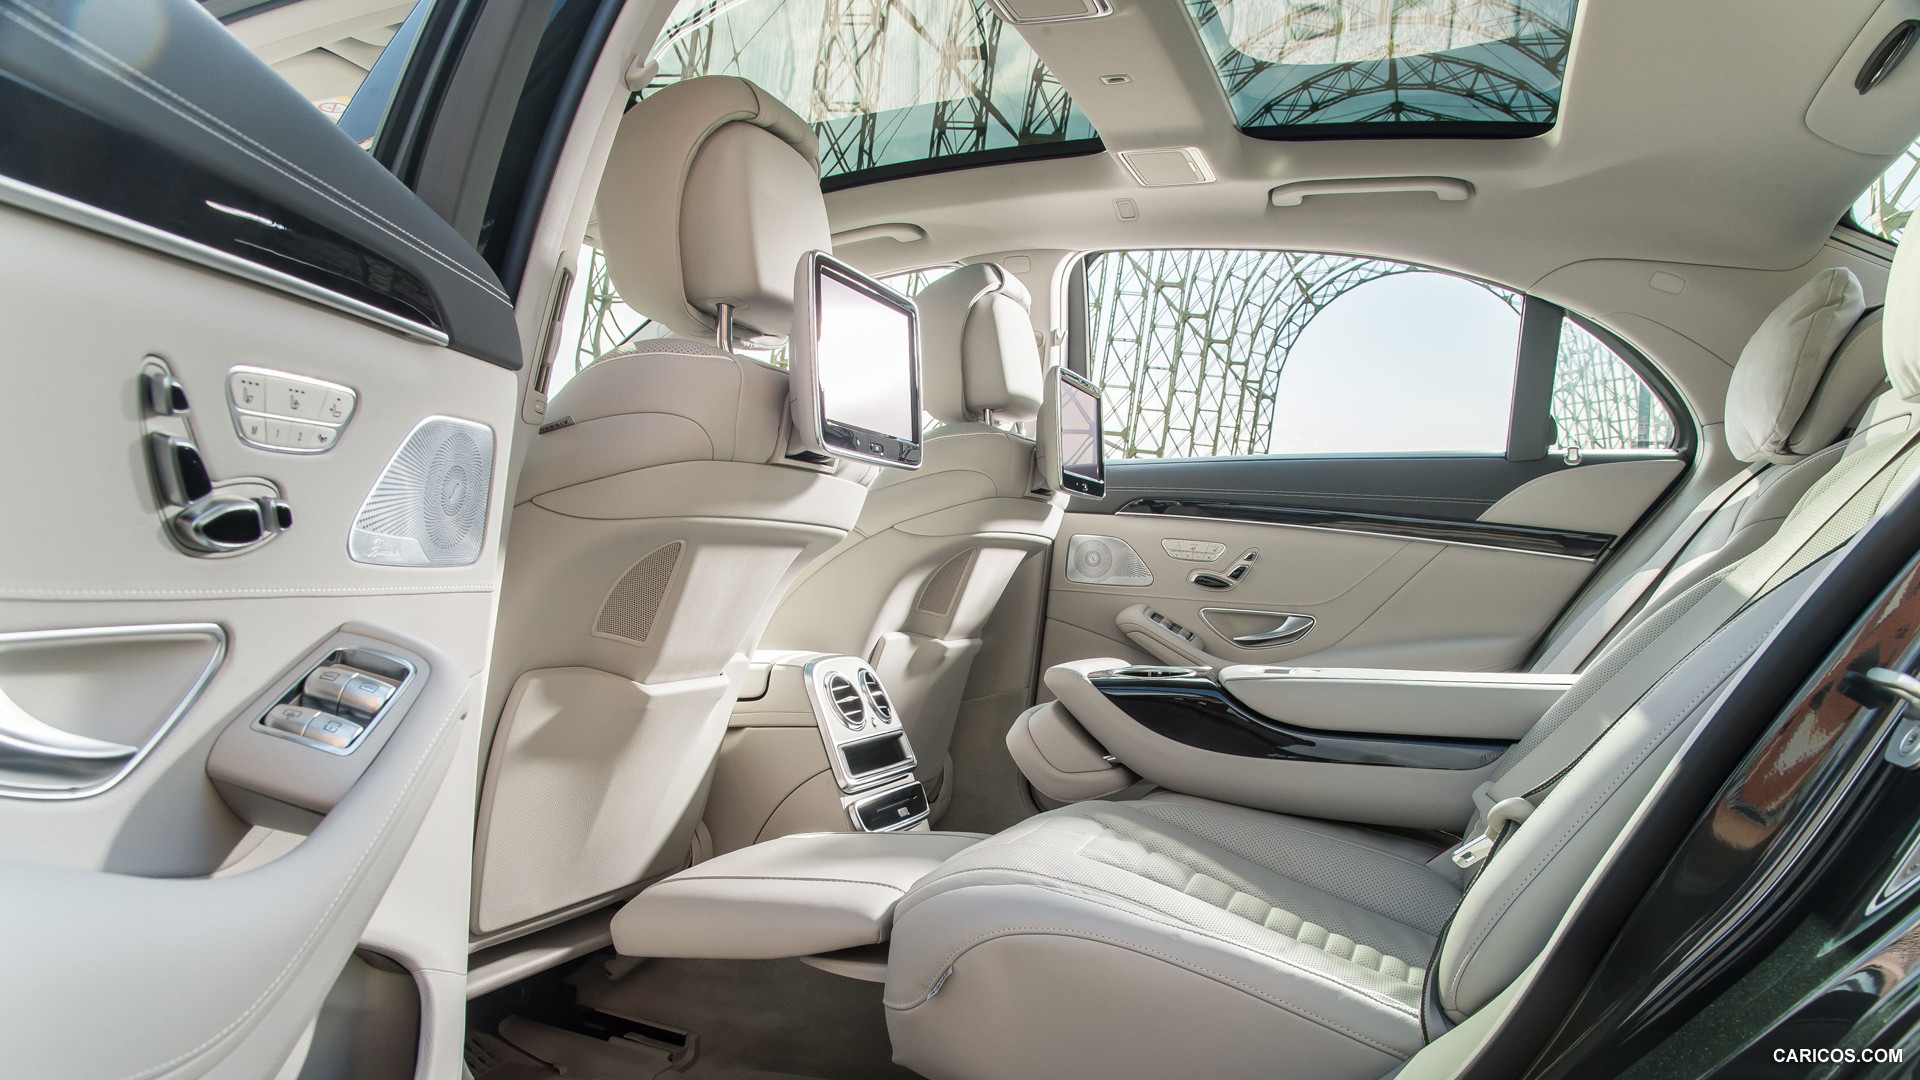 2014 Mercedes-Benz S-Class S500 (UK-Version) Panoramic Roof - Interior, #46 of 60